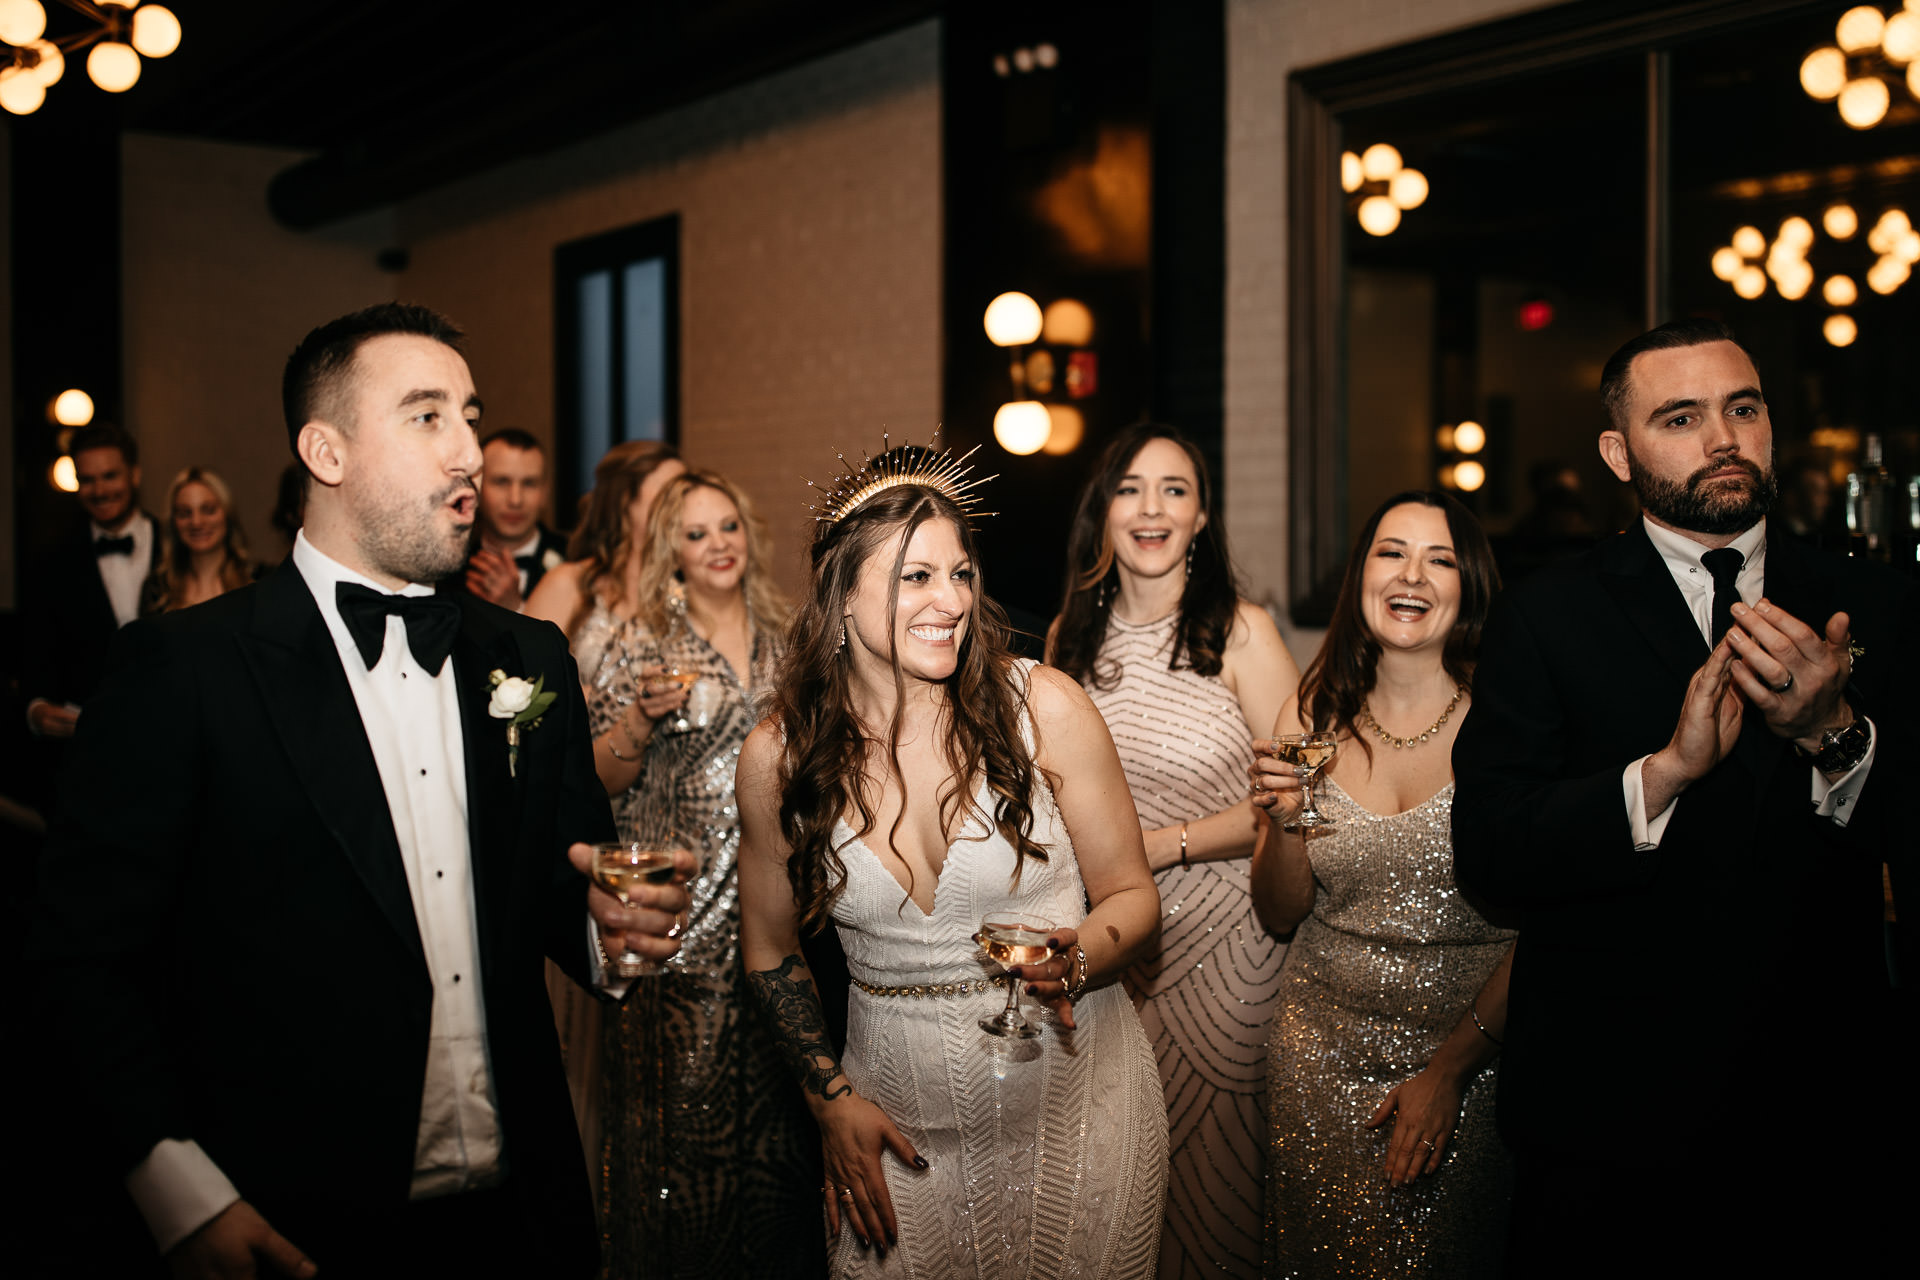 Stephanie & Nick's Wedding at the 501 Union In New York by Jean-Laurent Gaudy